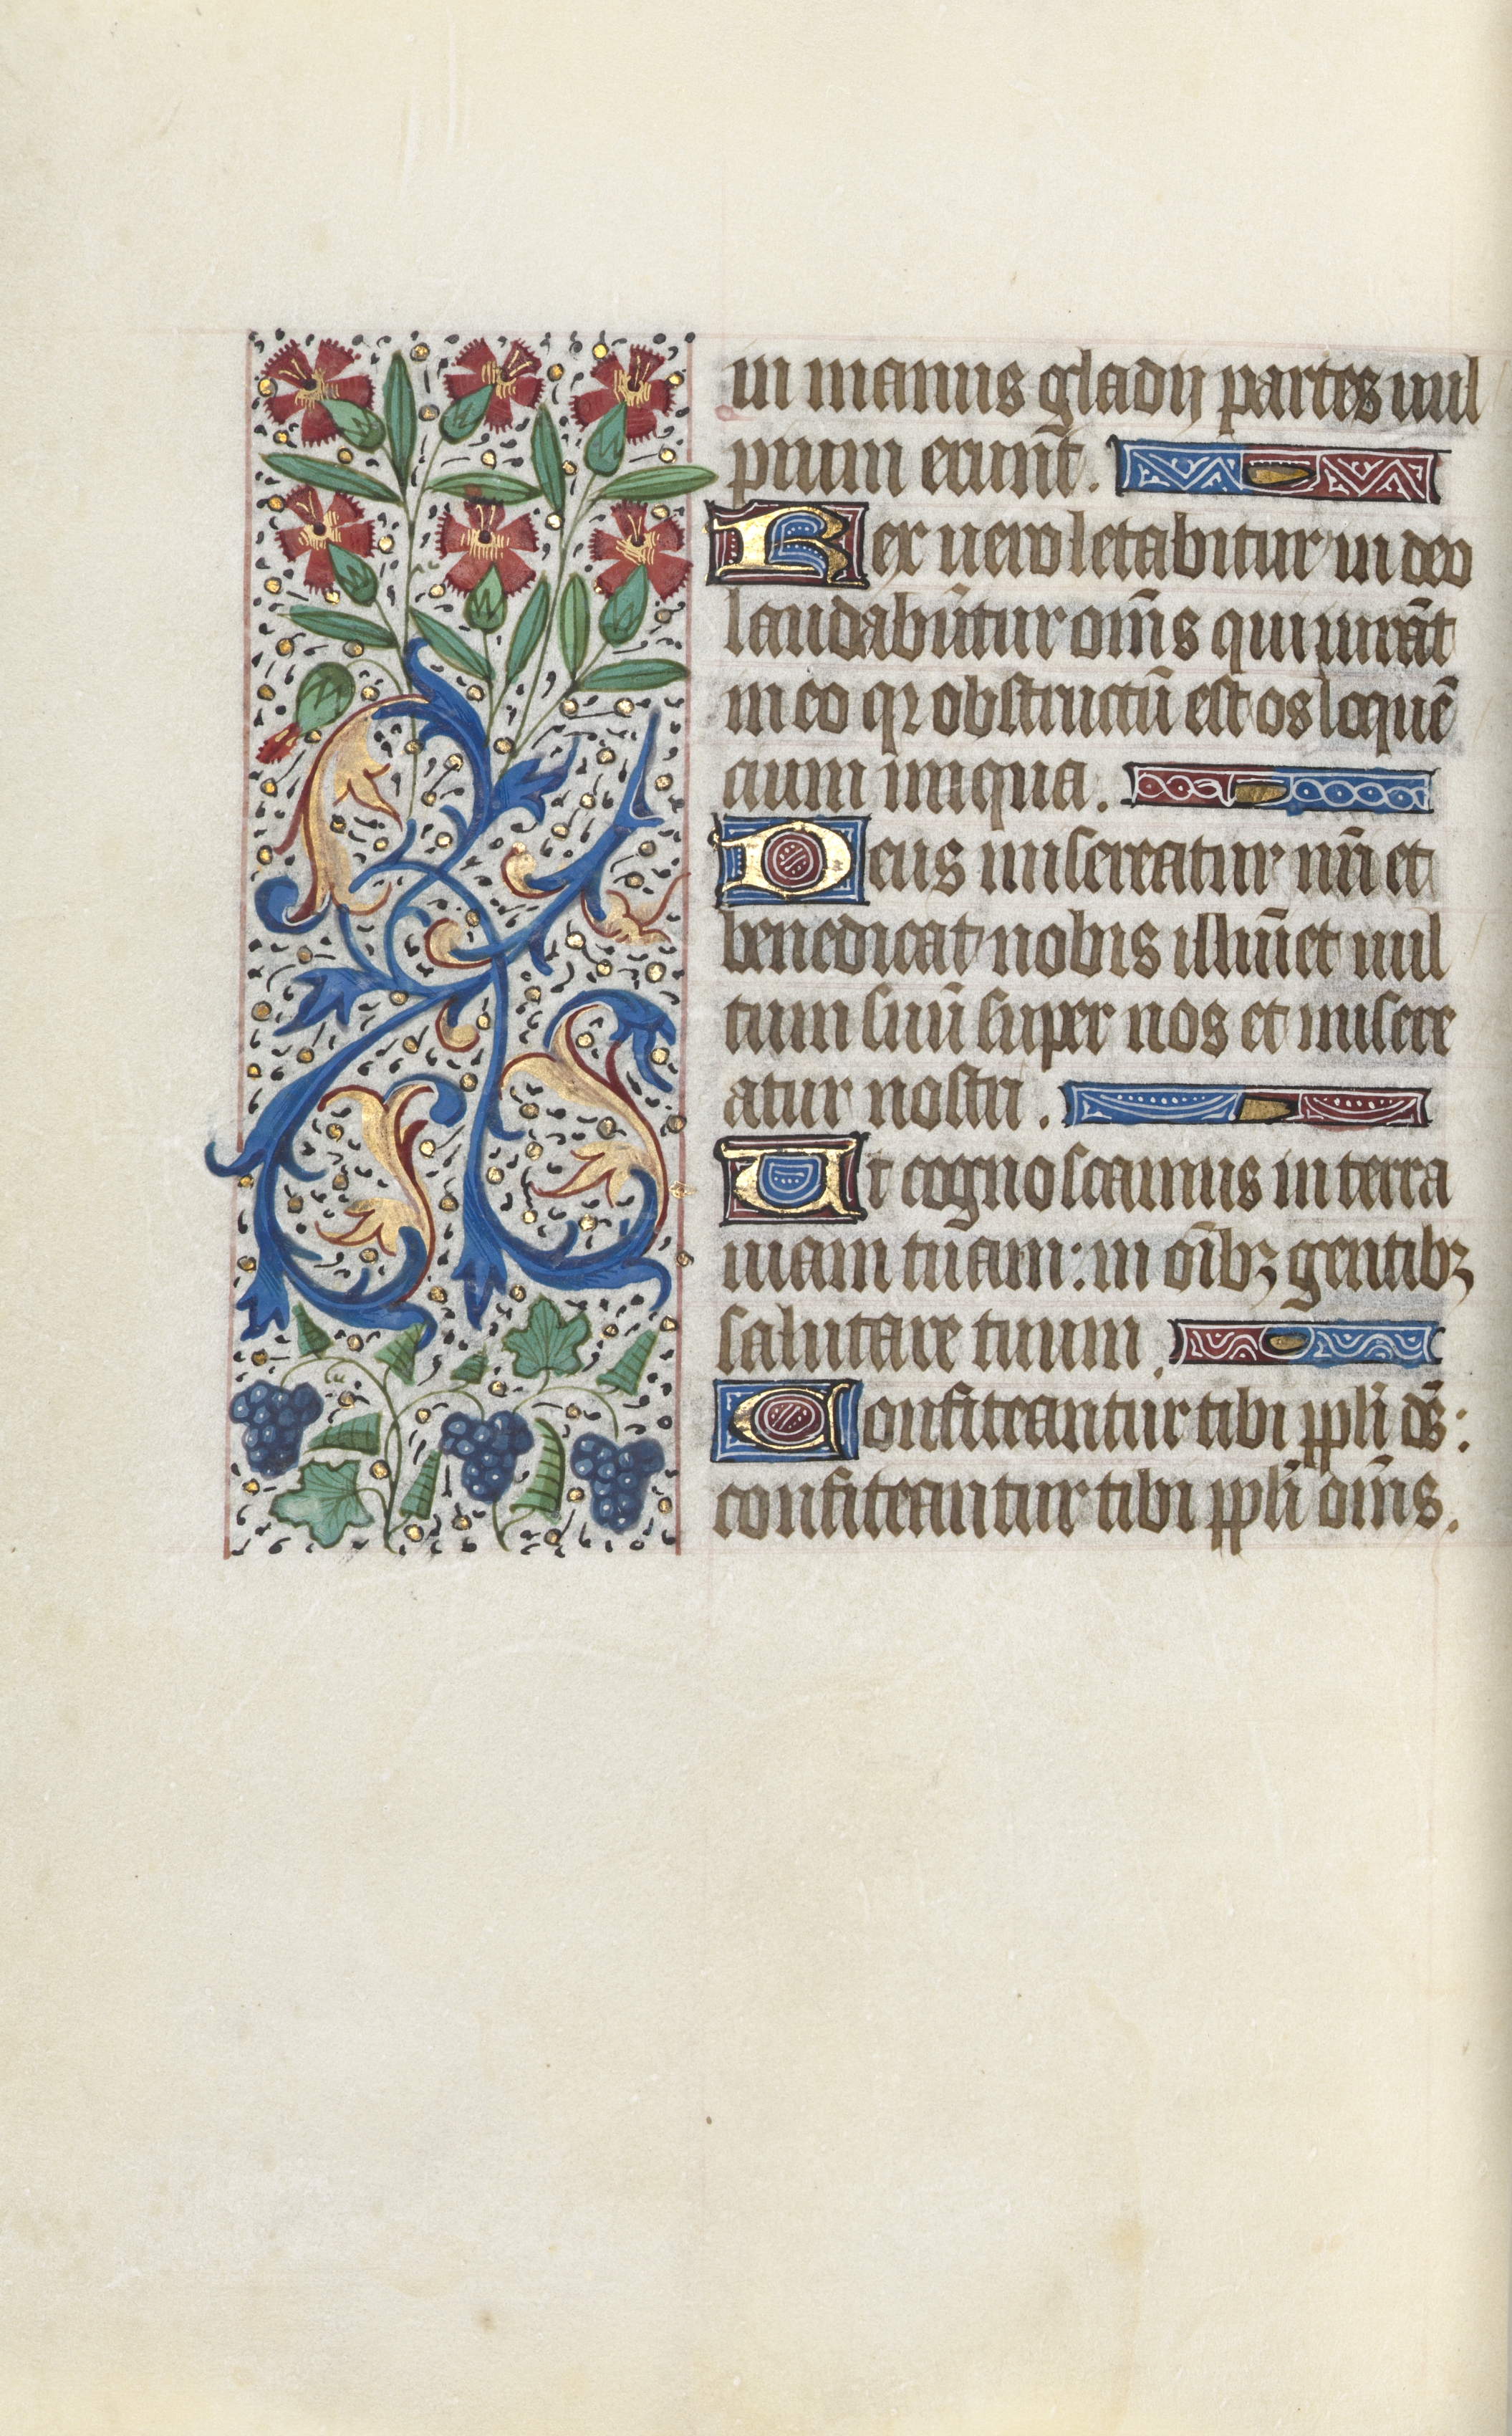 Book of Hours (Use of Rouen): fol. 138v